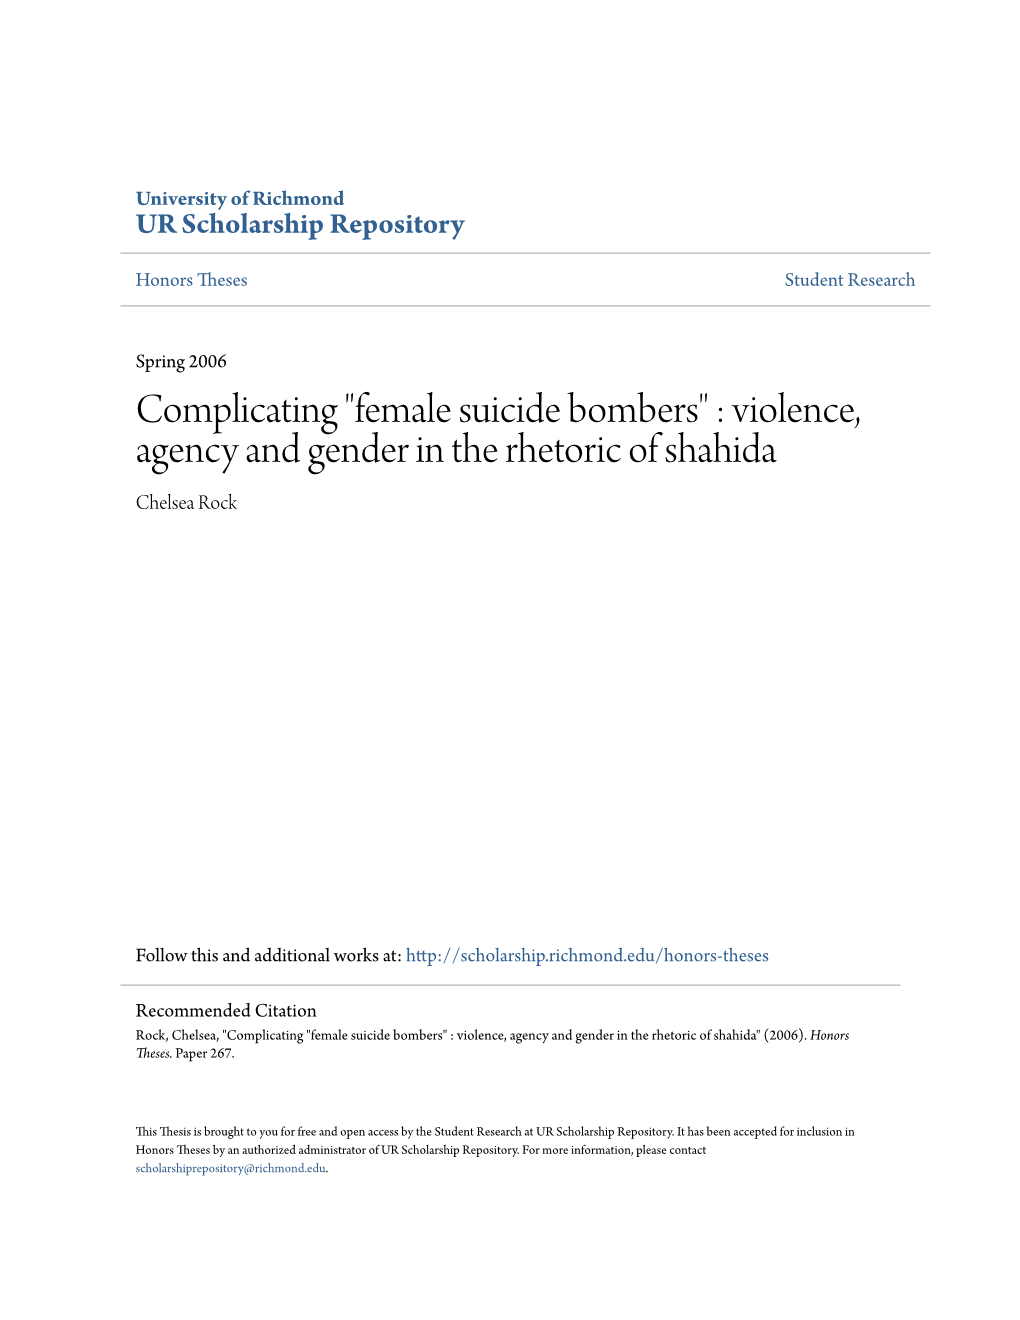 Female Suicide Bombers" : Violence, Agency and Gender in the Rhetoric of Shahida Chelsea Rock